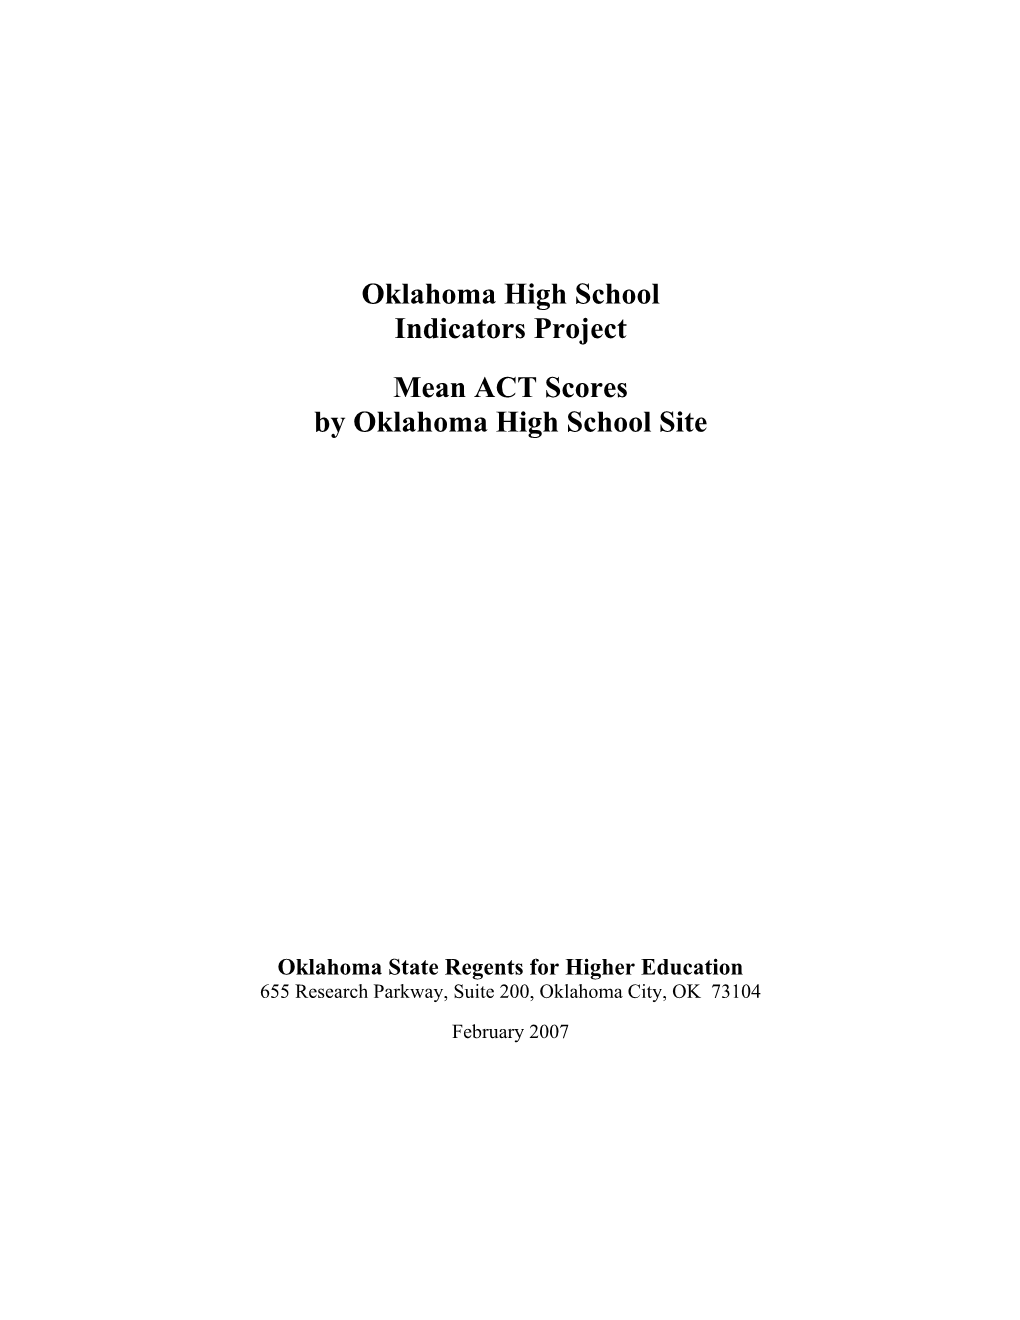 Oklahoma High School Indicators Project Mean ACT Scores by Oklahoma High School Site